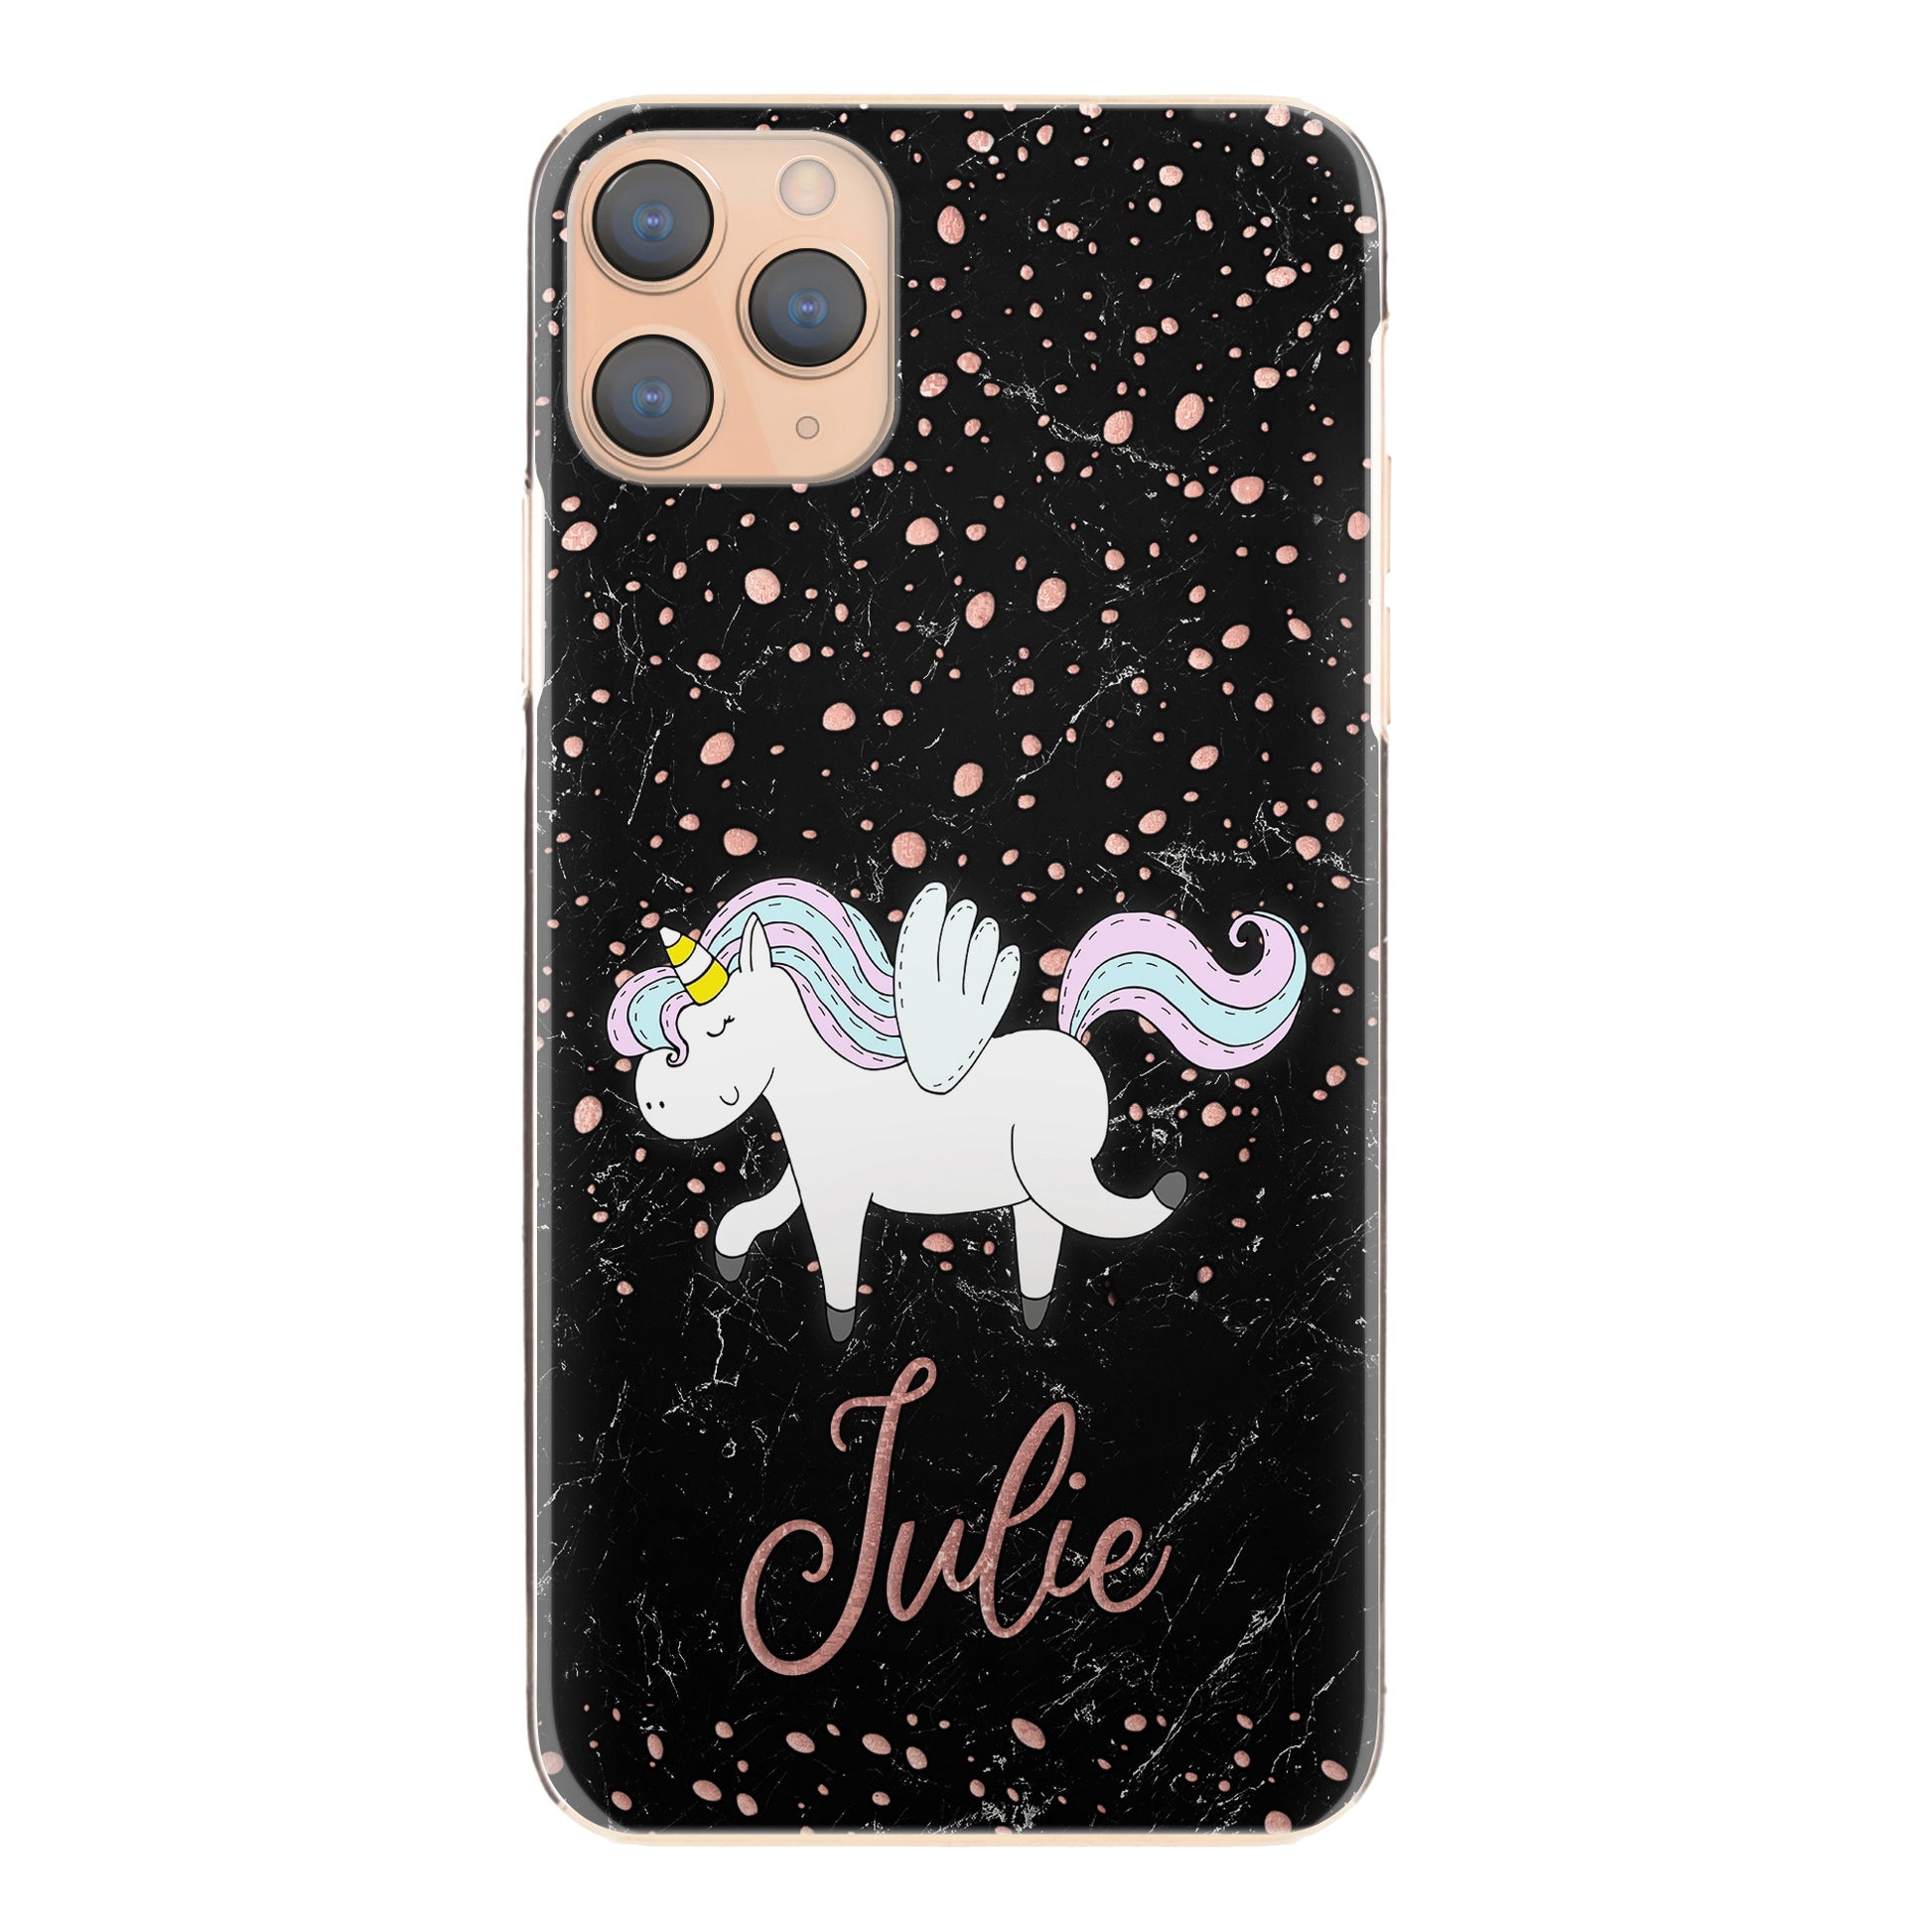 Personalised LG Phone Hard Case with Winged Unicorn and Pink Text on Black Marble